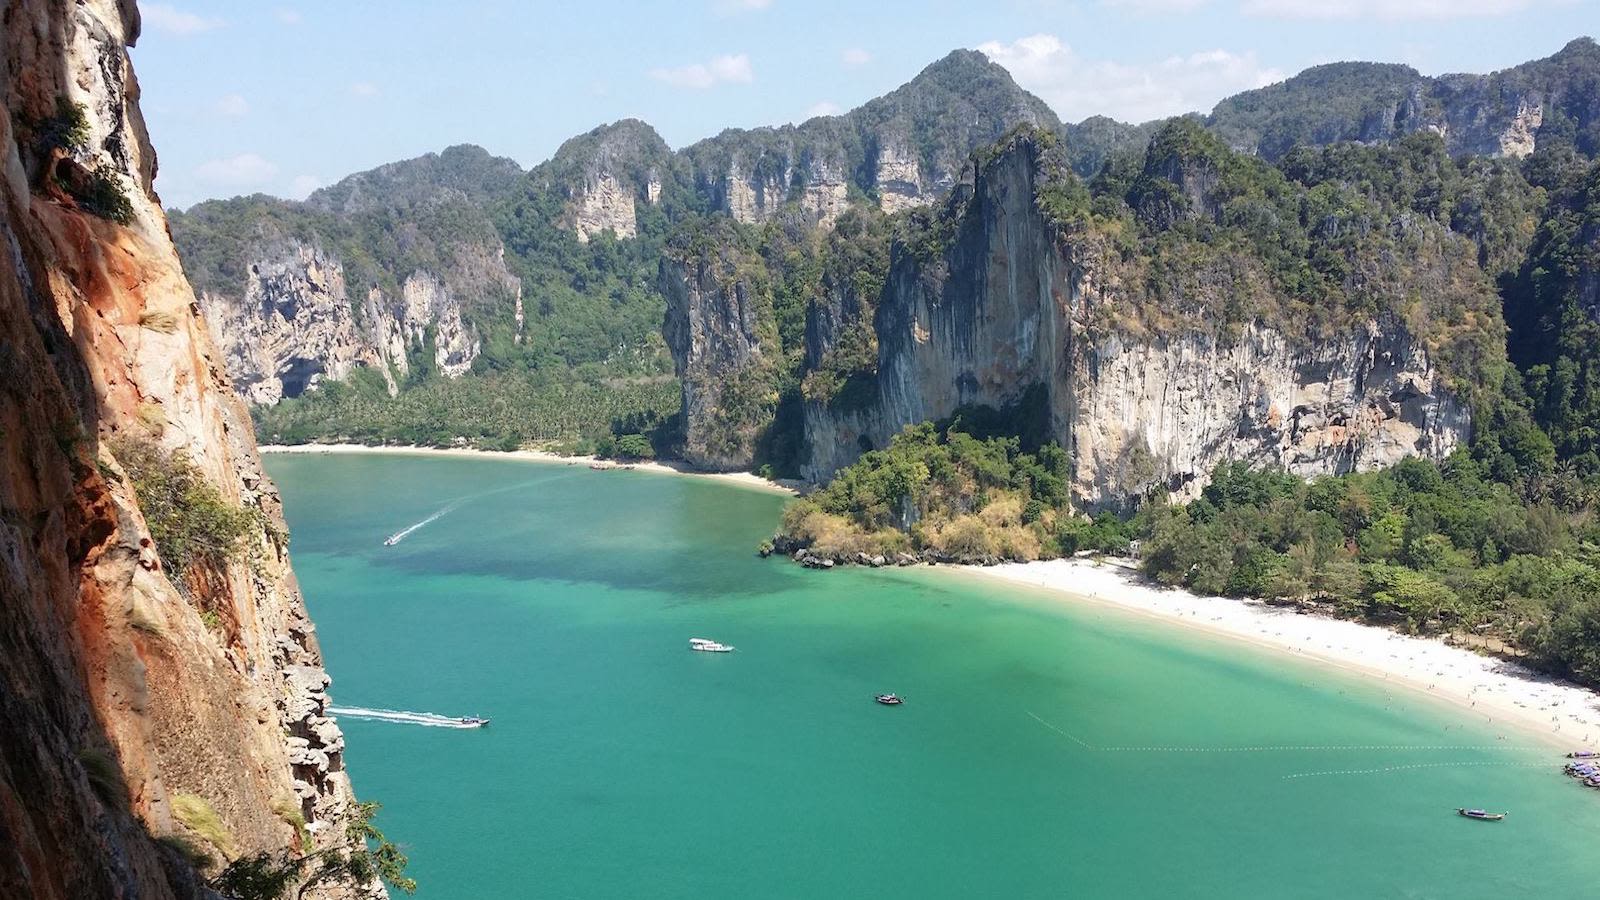 Railay beach: best tips and activities in Thailand